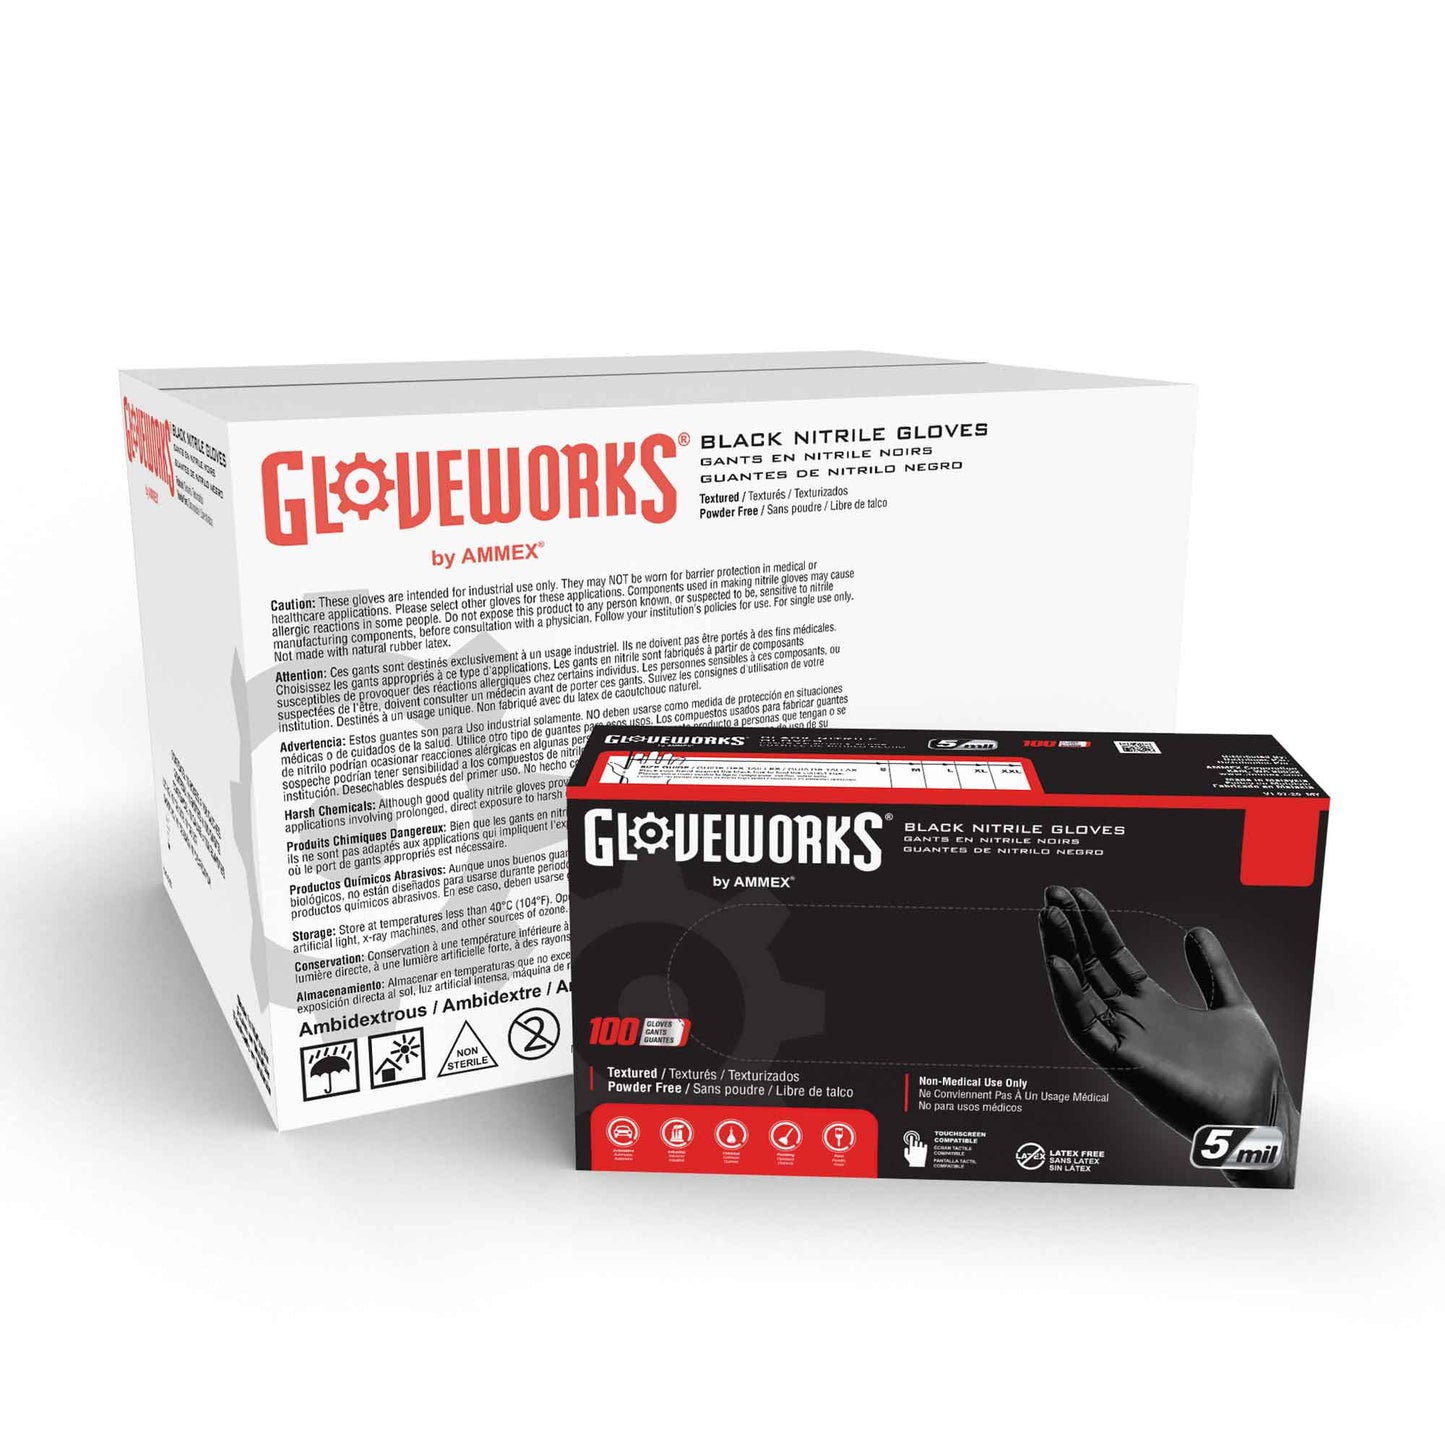 GloveWorks® Black Nitrile Gloves, Fully Textured, Extra Thick GPNB by Ammex, 5-6 Mil, Powder Free.